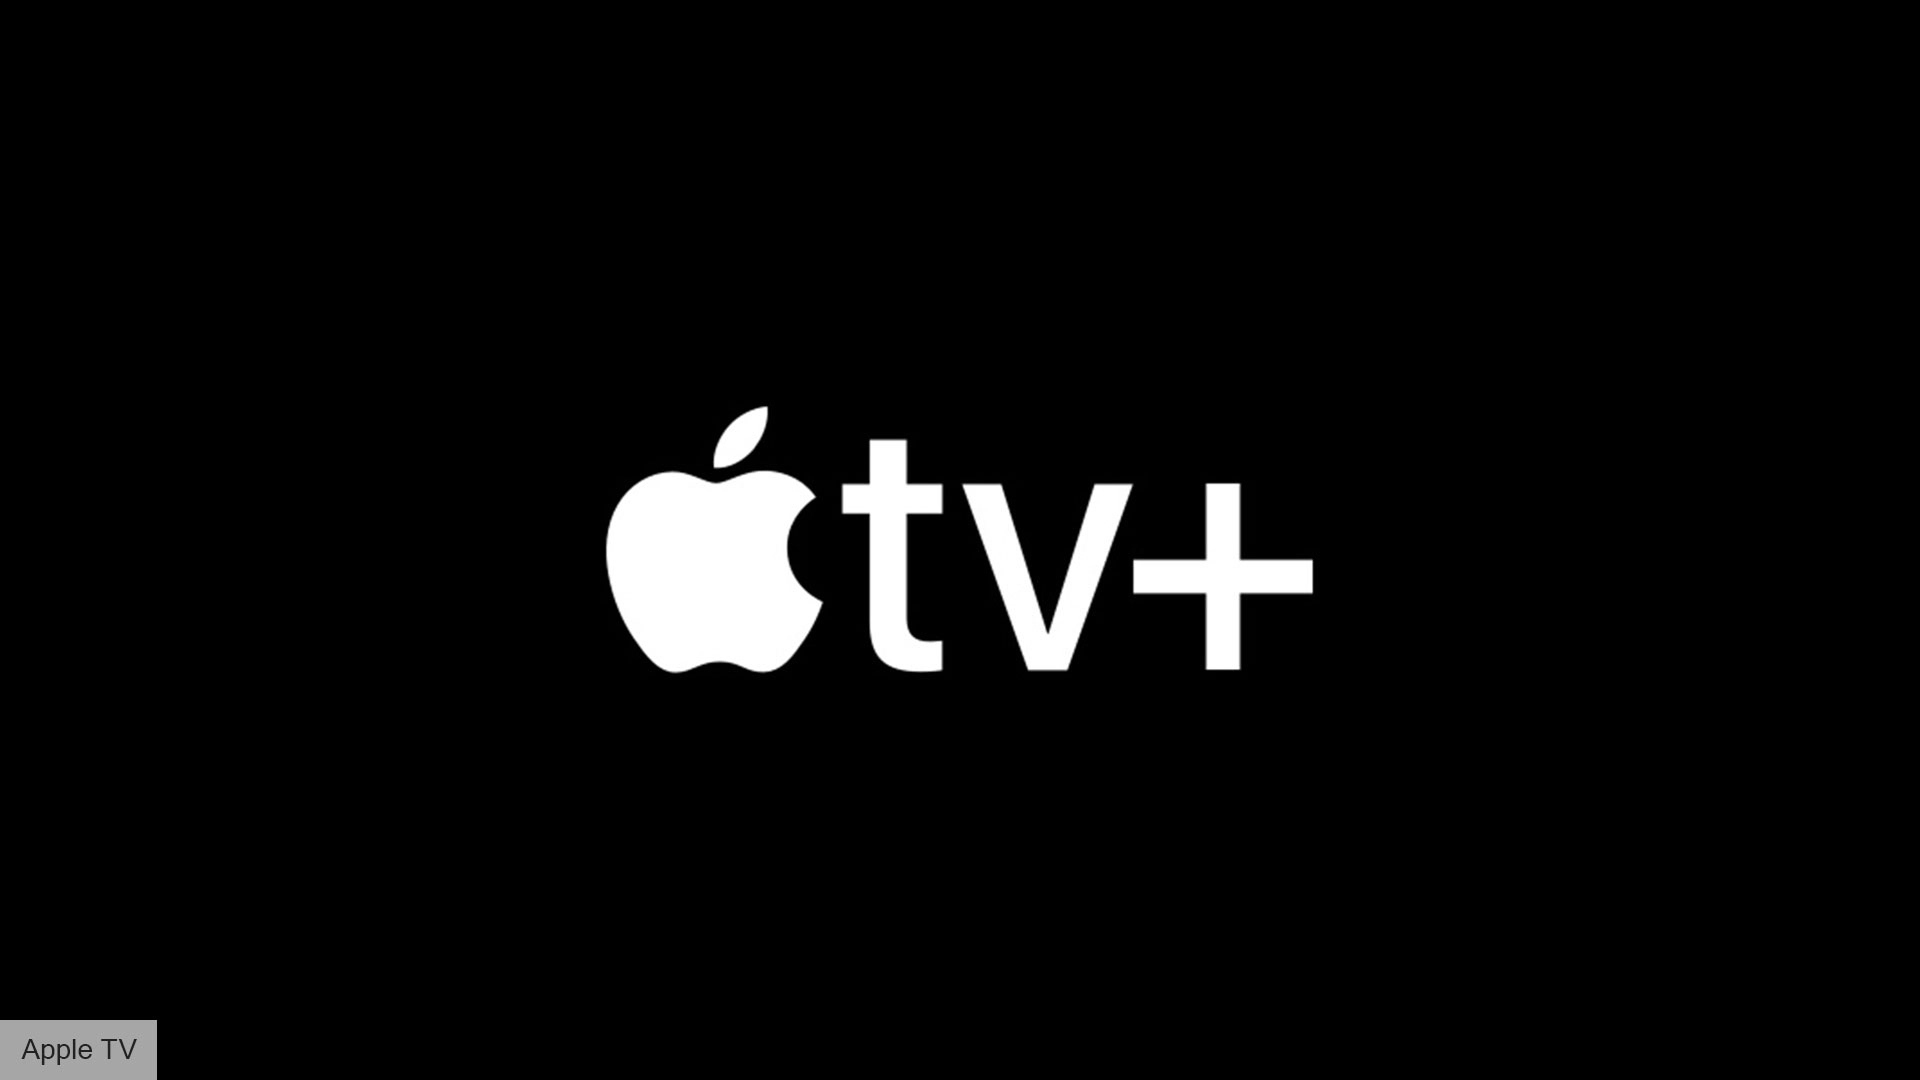 Best streaming service, Apple TV Plus - its iconic white logo is on a plain black background.